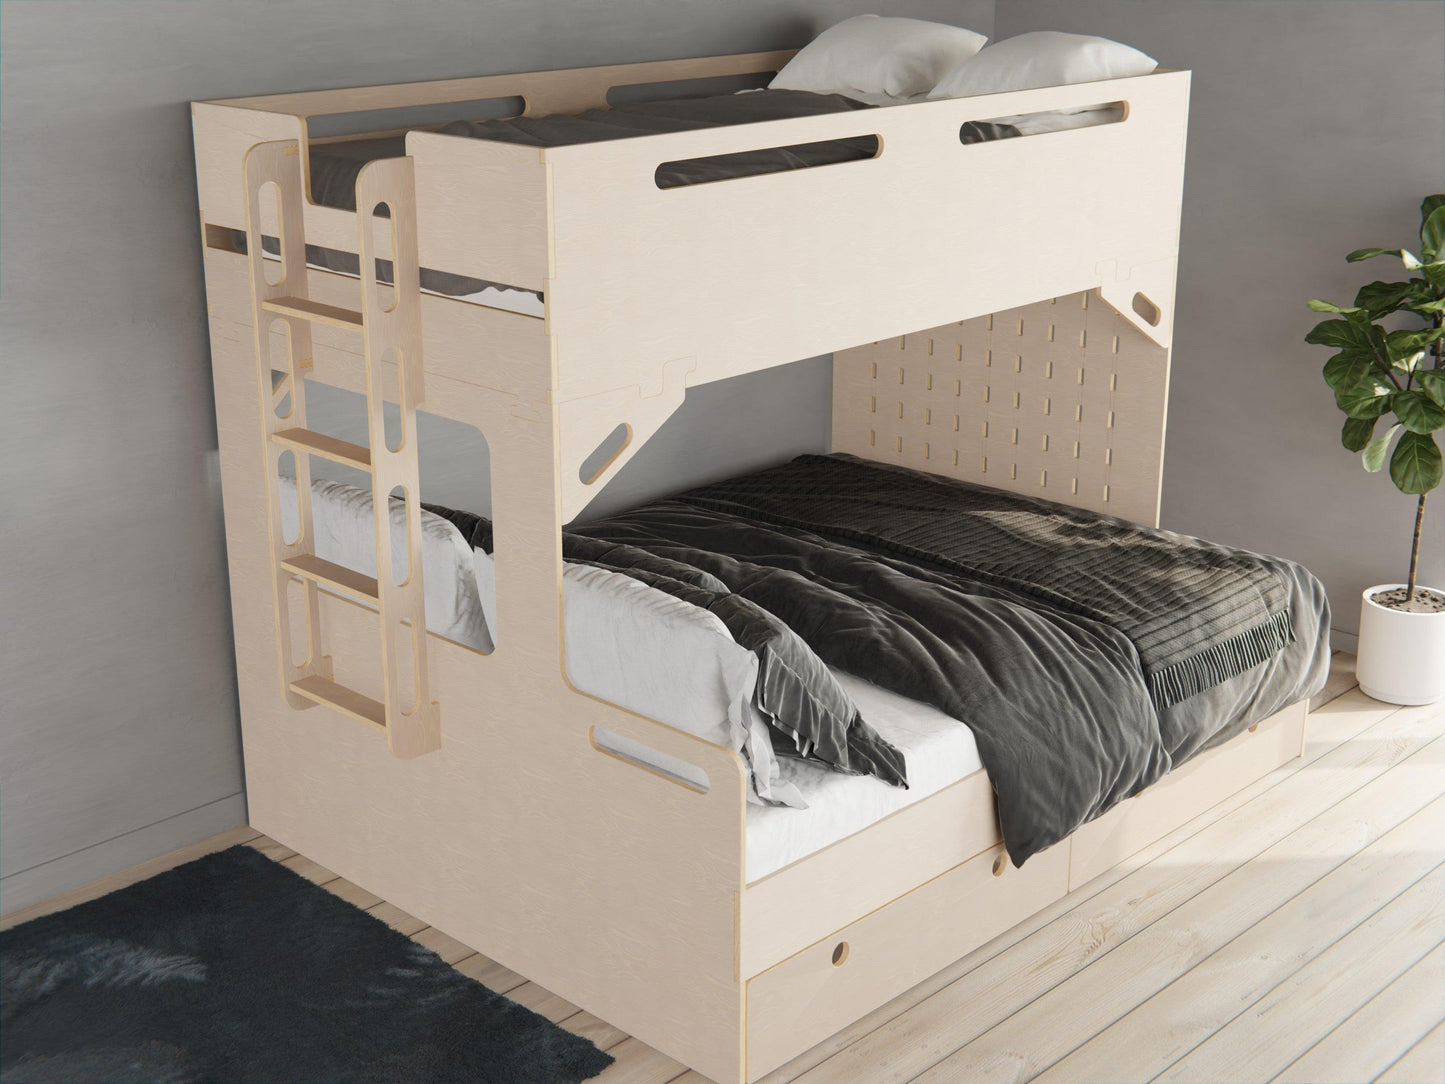 Our plywood triple bunk beds are perfect for growing families. Enjoy ample space and added storage drawers.